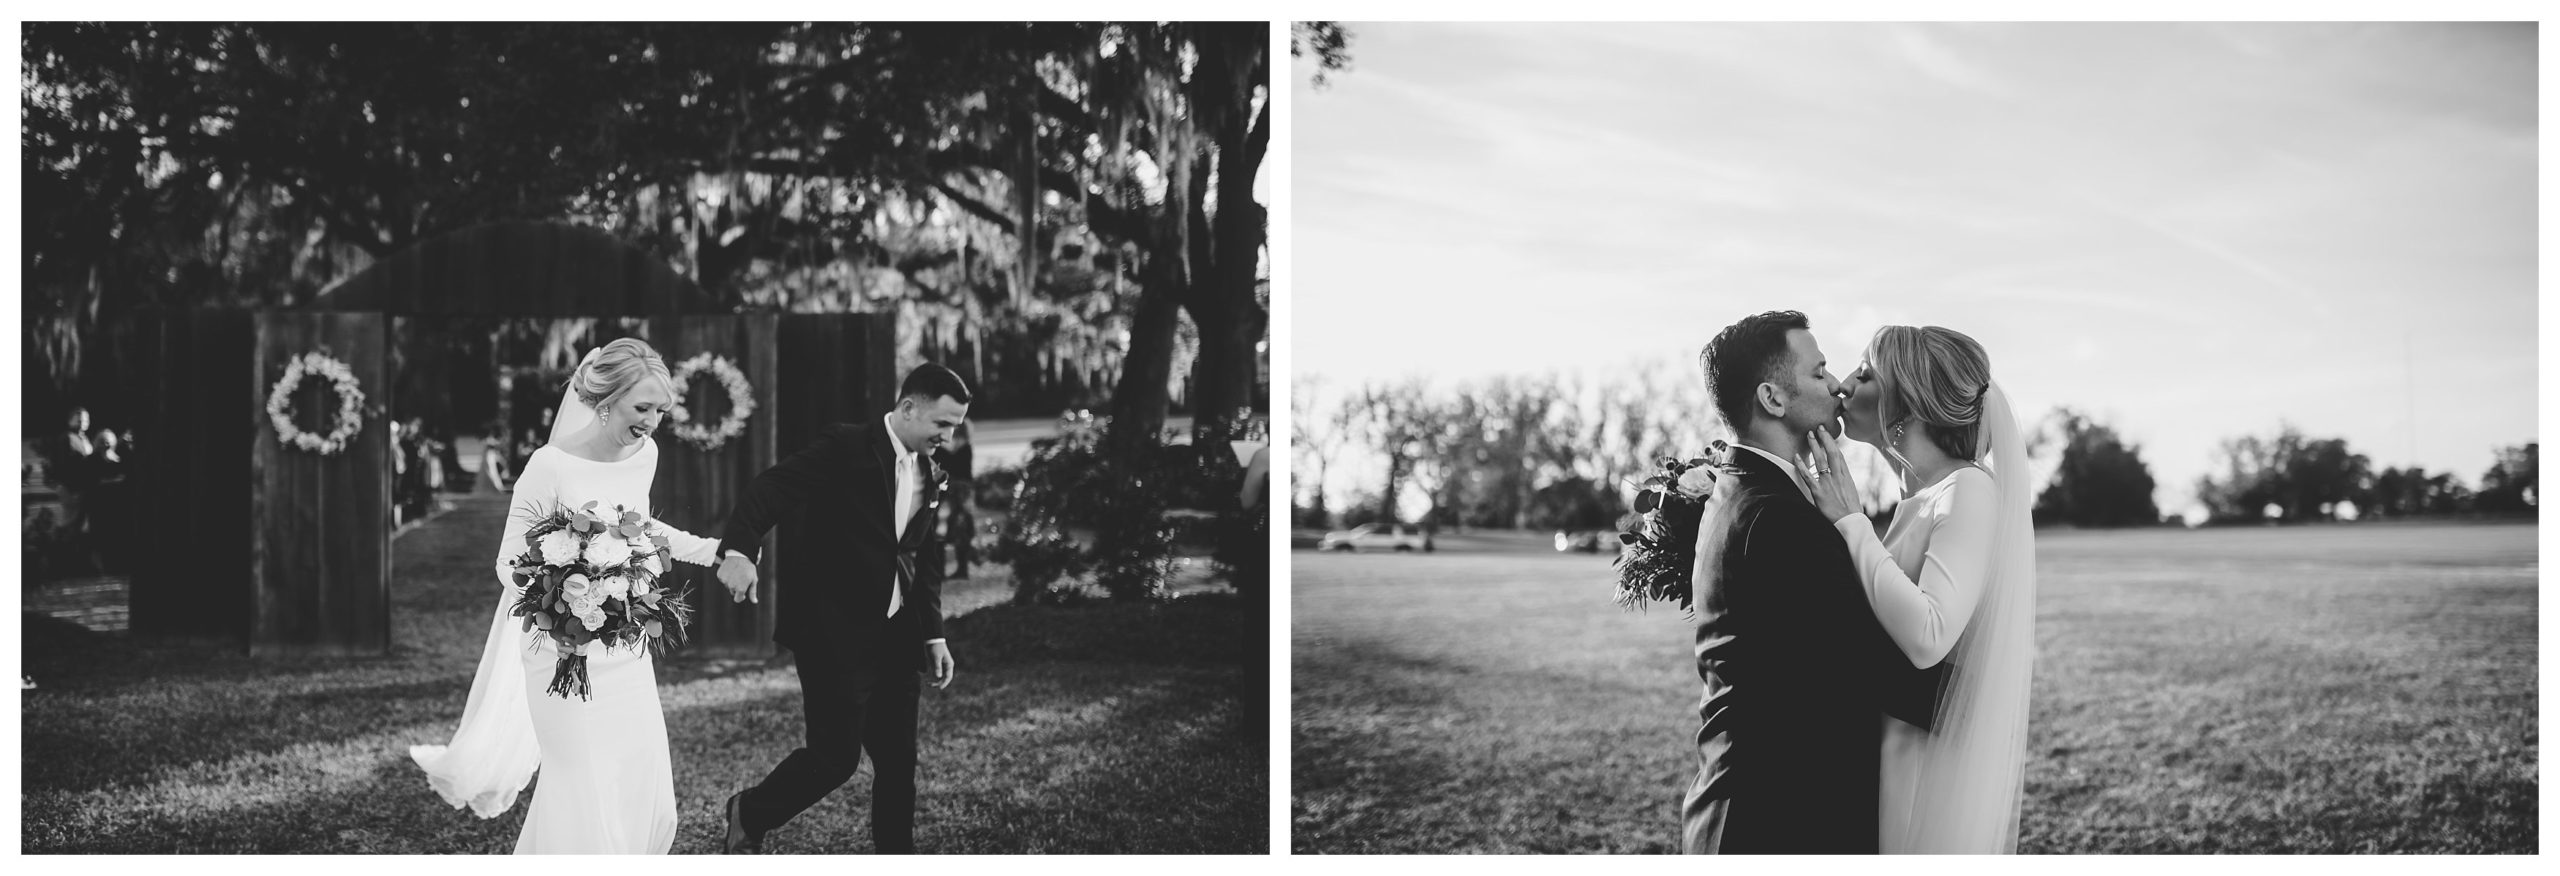 Lifestyle wedding photographer in north florida focuses on moments of the day - Shelly Williams Photography